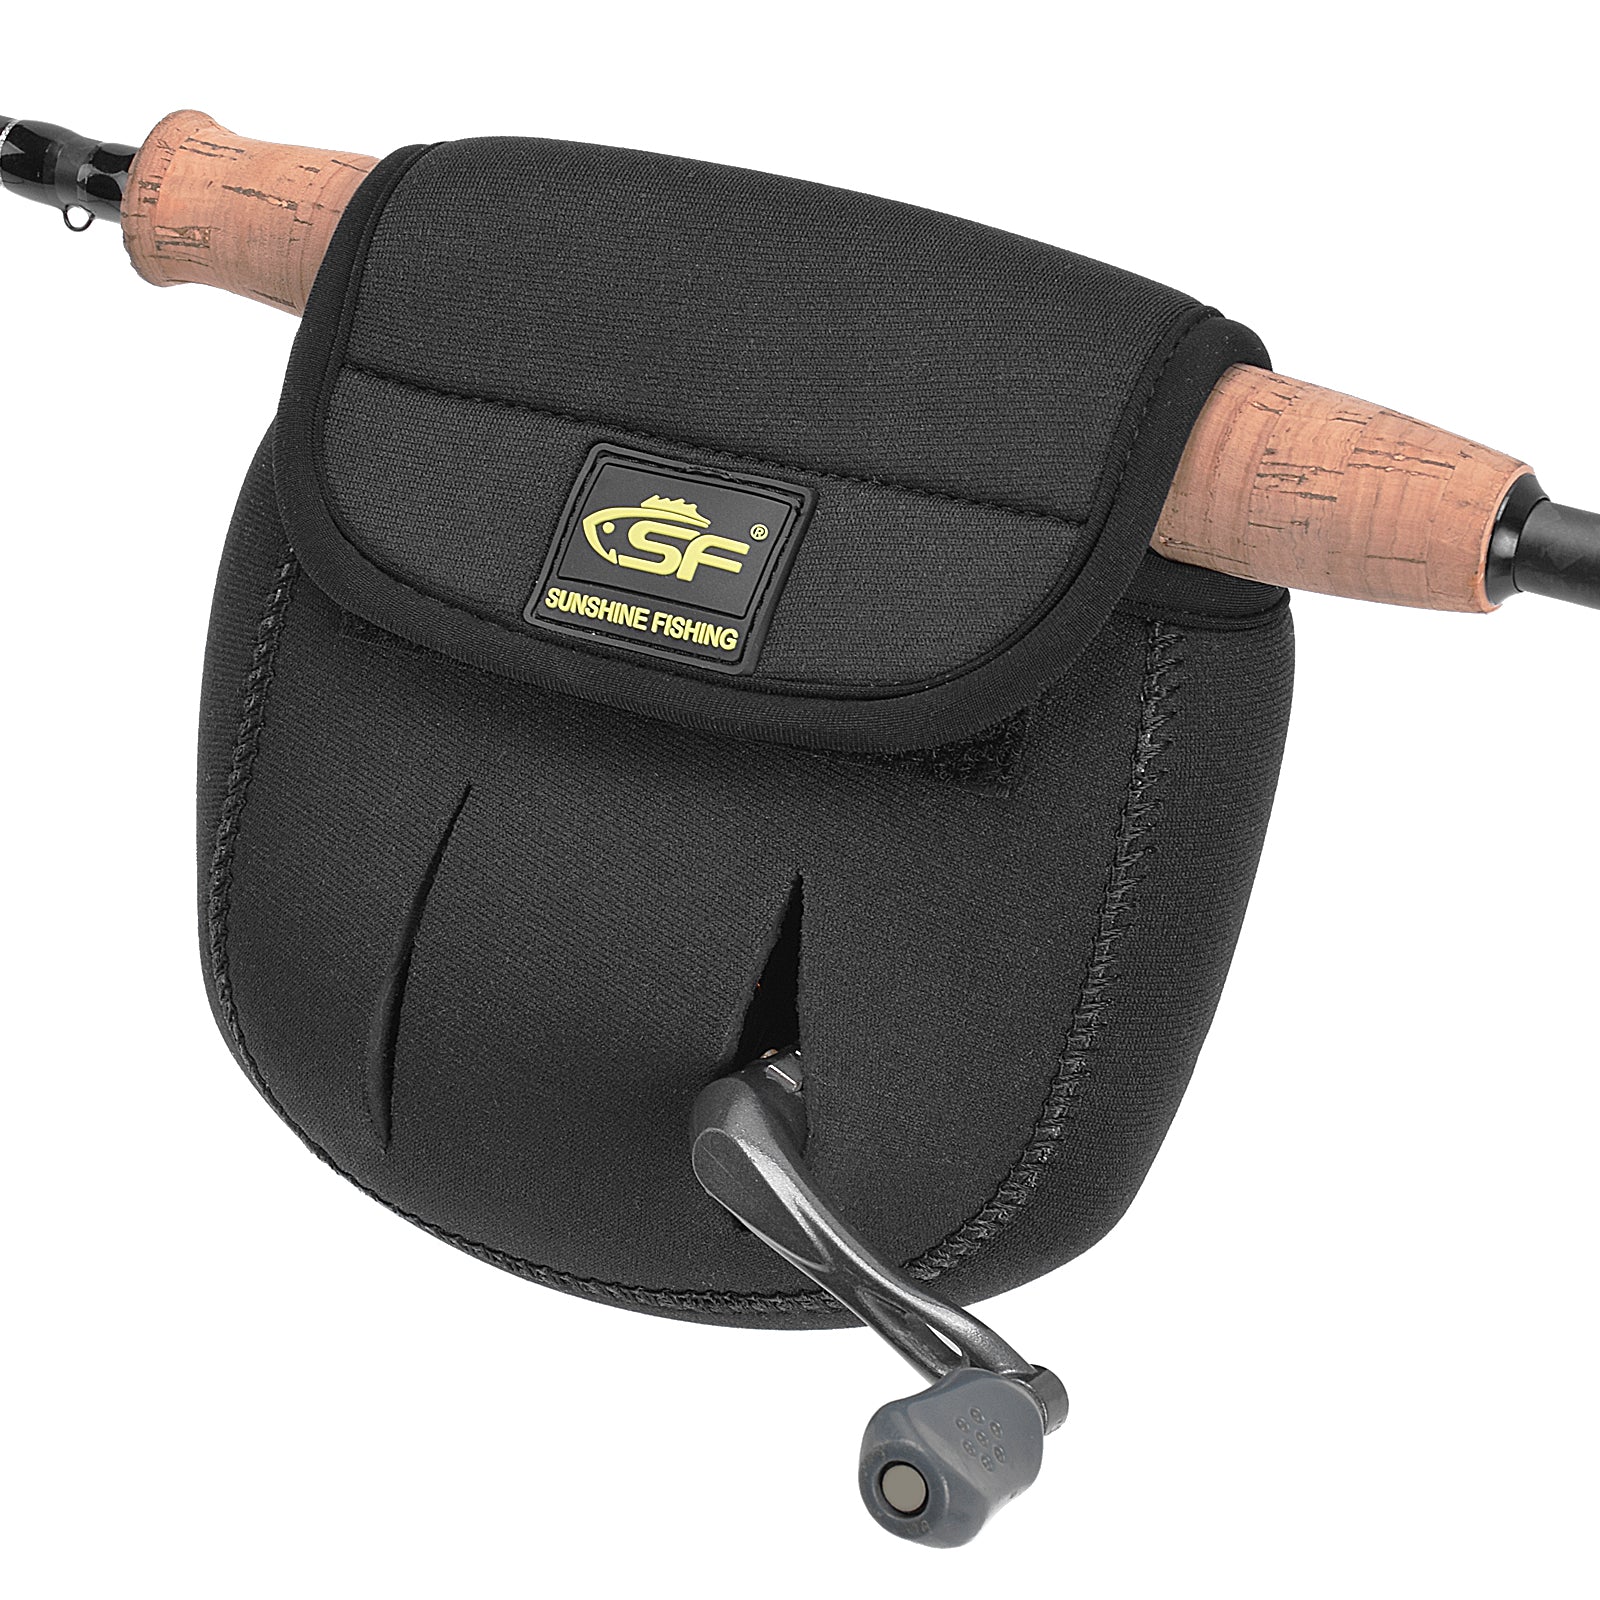 Spinning Reel Case, Spinning Reel Pouch